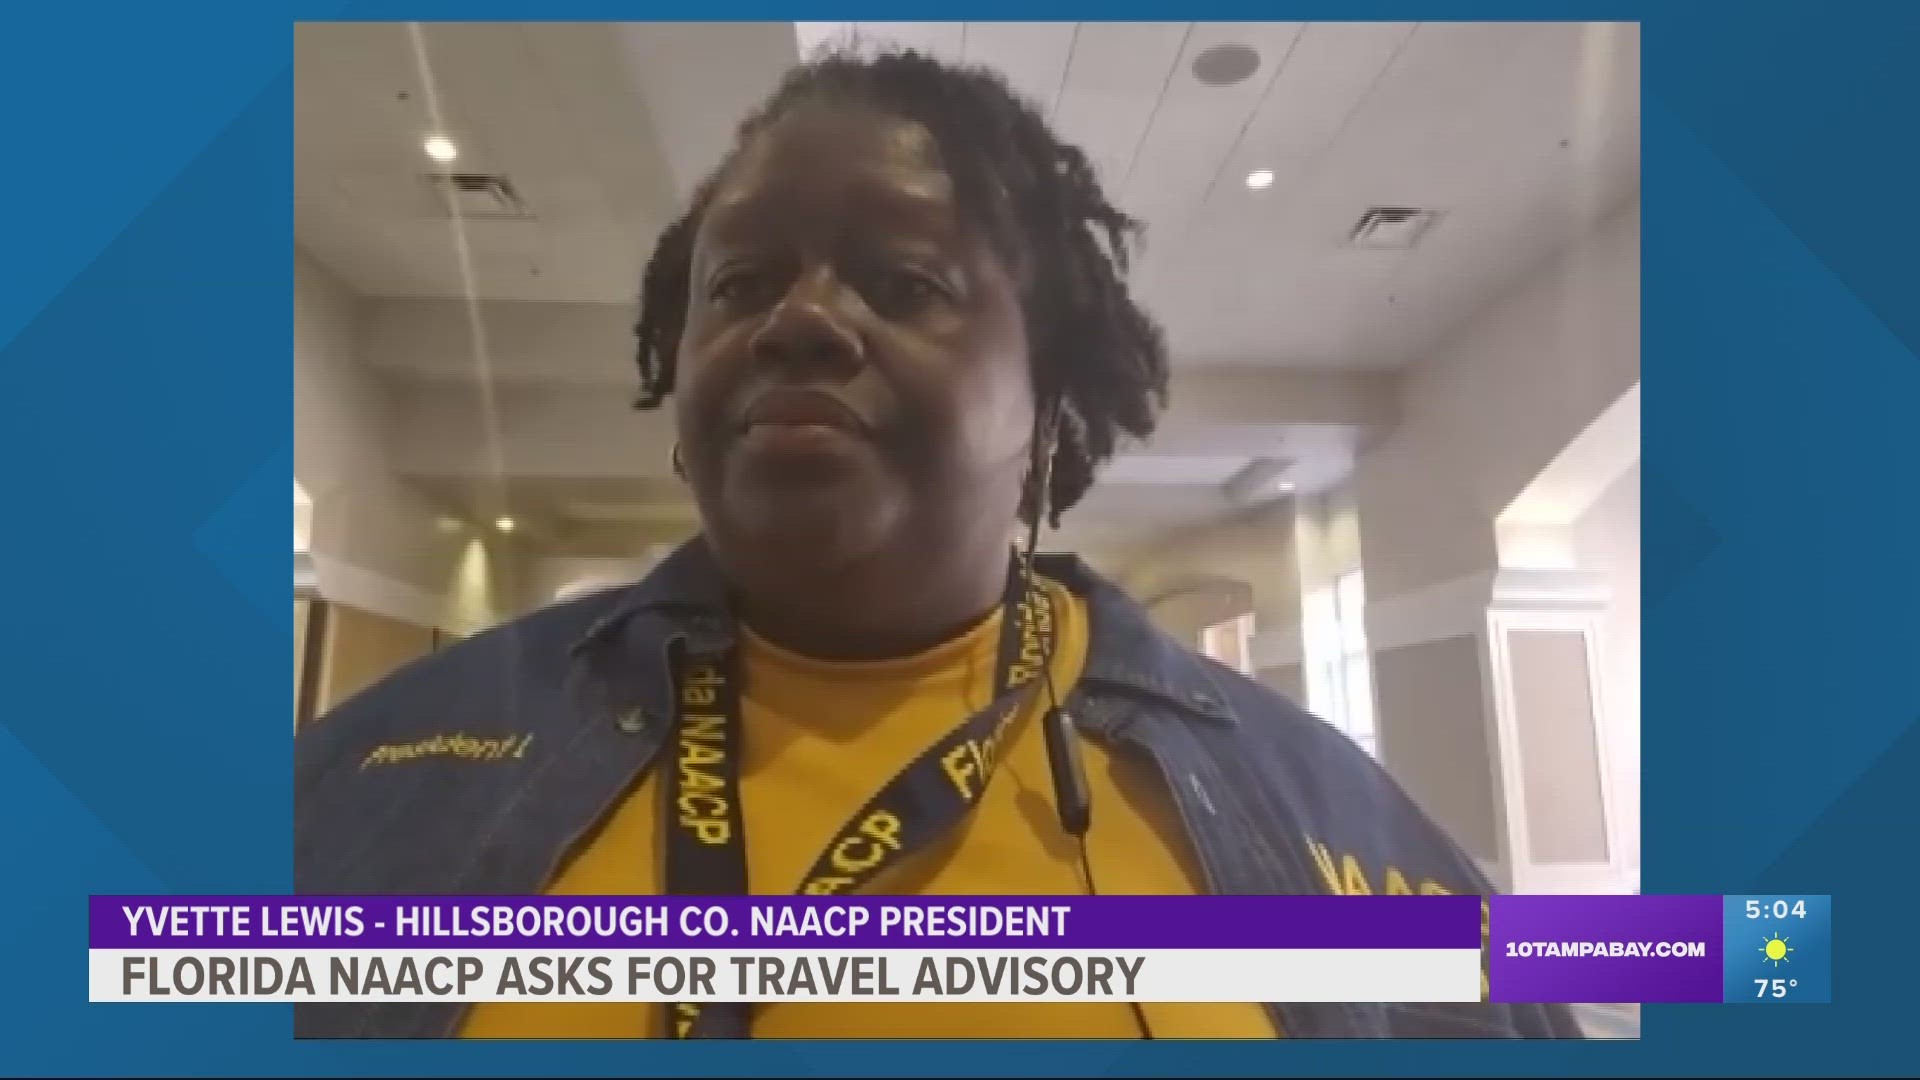 The travel advisory would come as a slew of bills targeting discussions on race and gender identity move through the legislature.